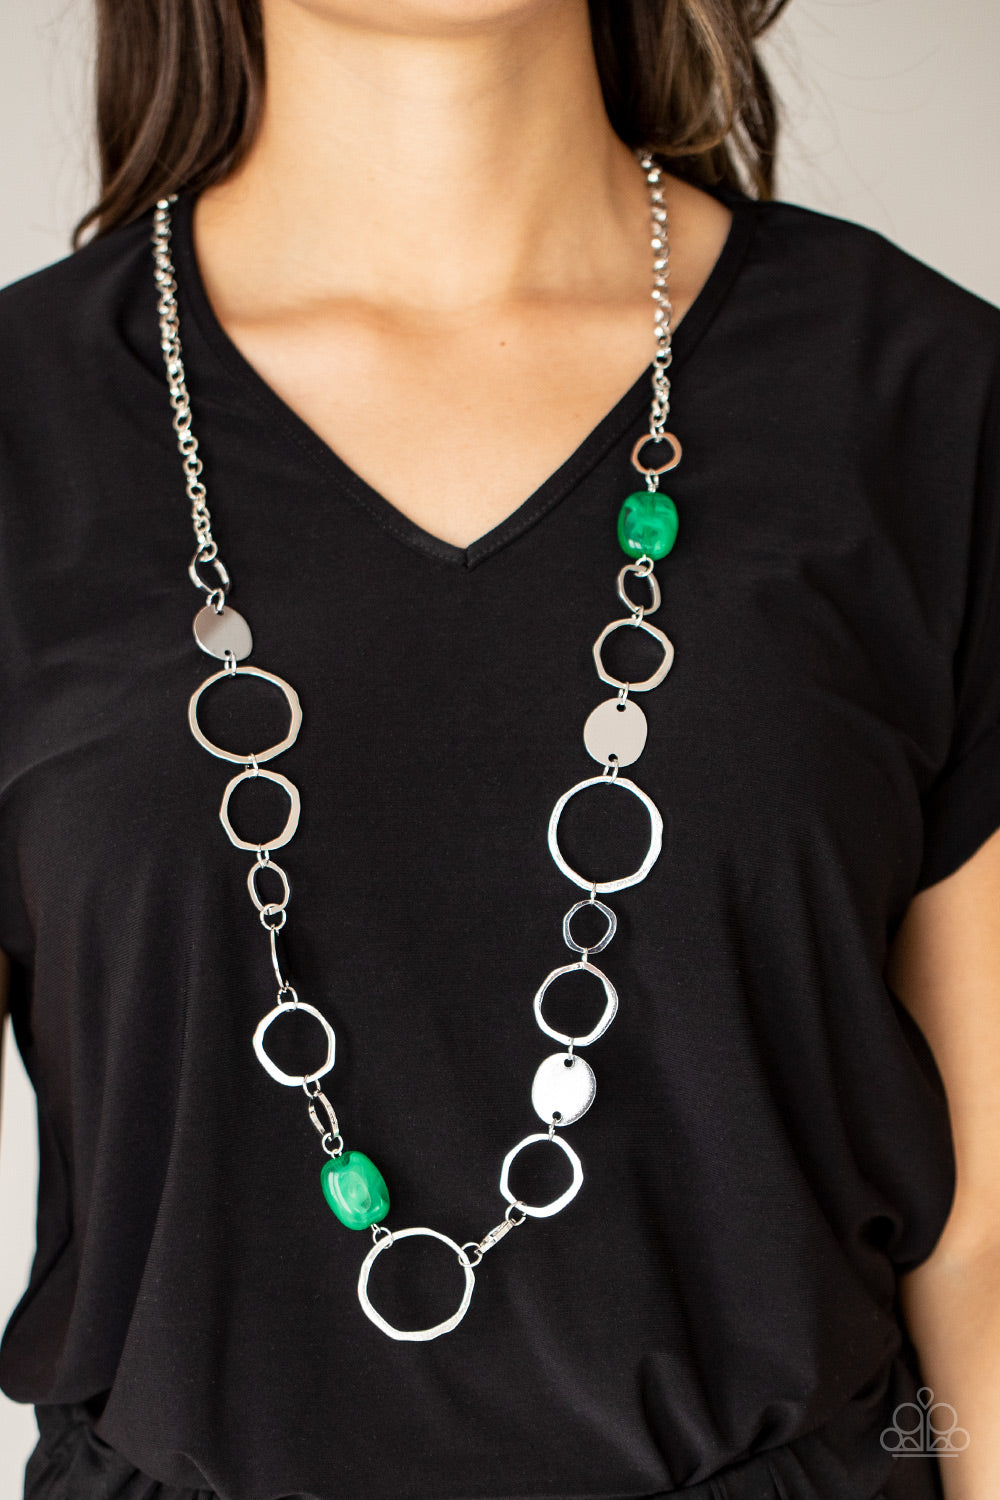 Paparazzi Necklaces - Colorful Combo - Green